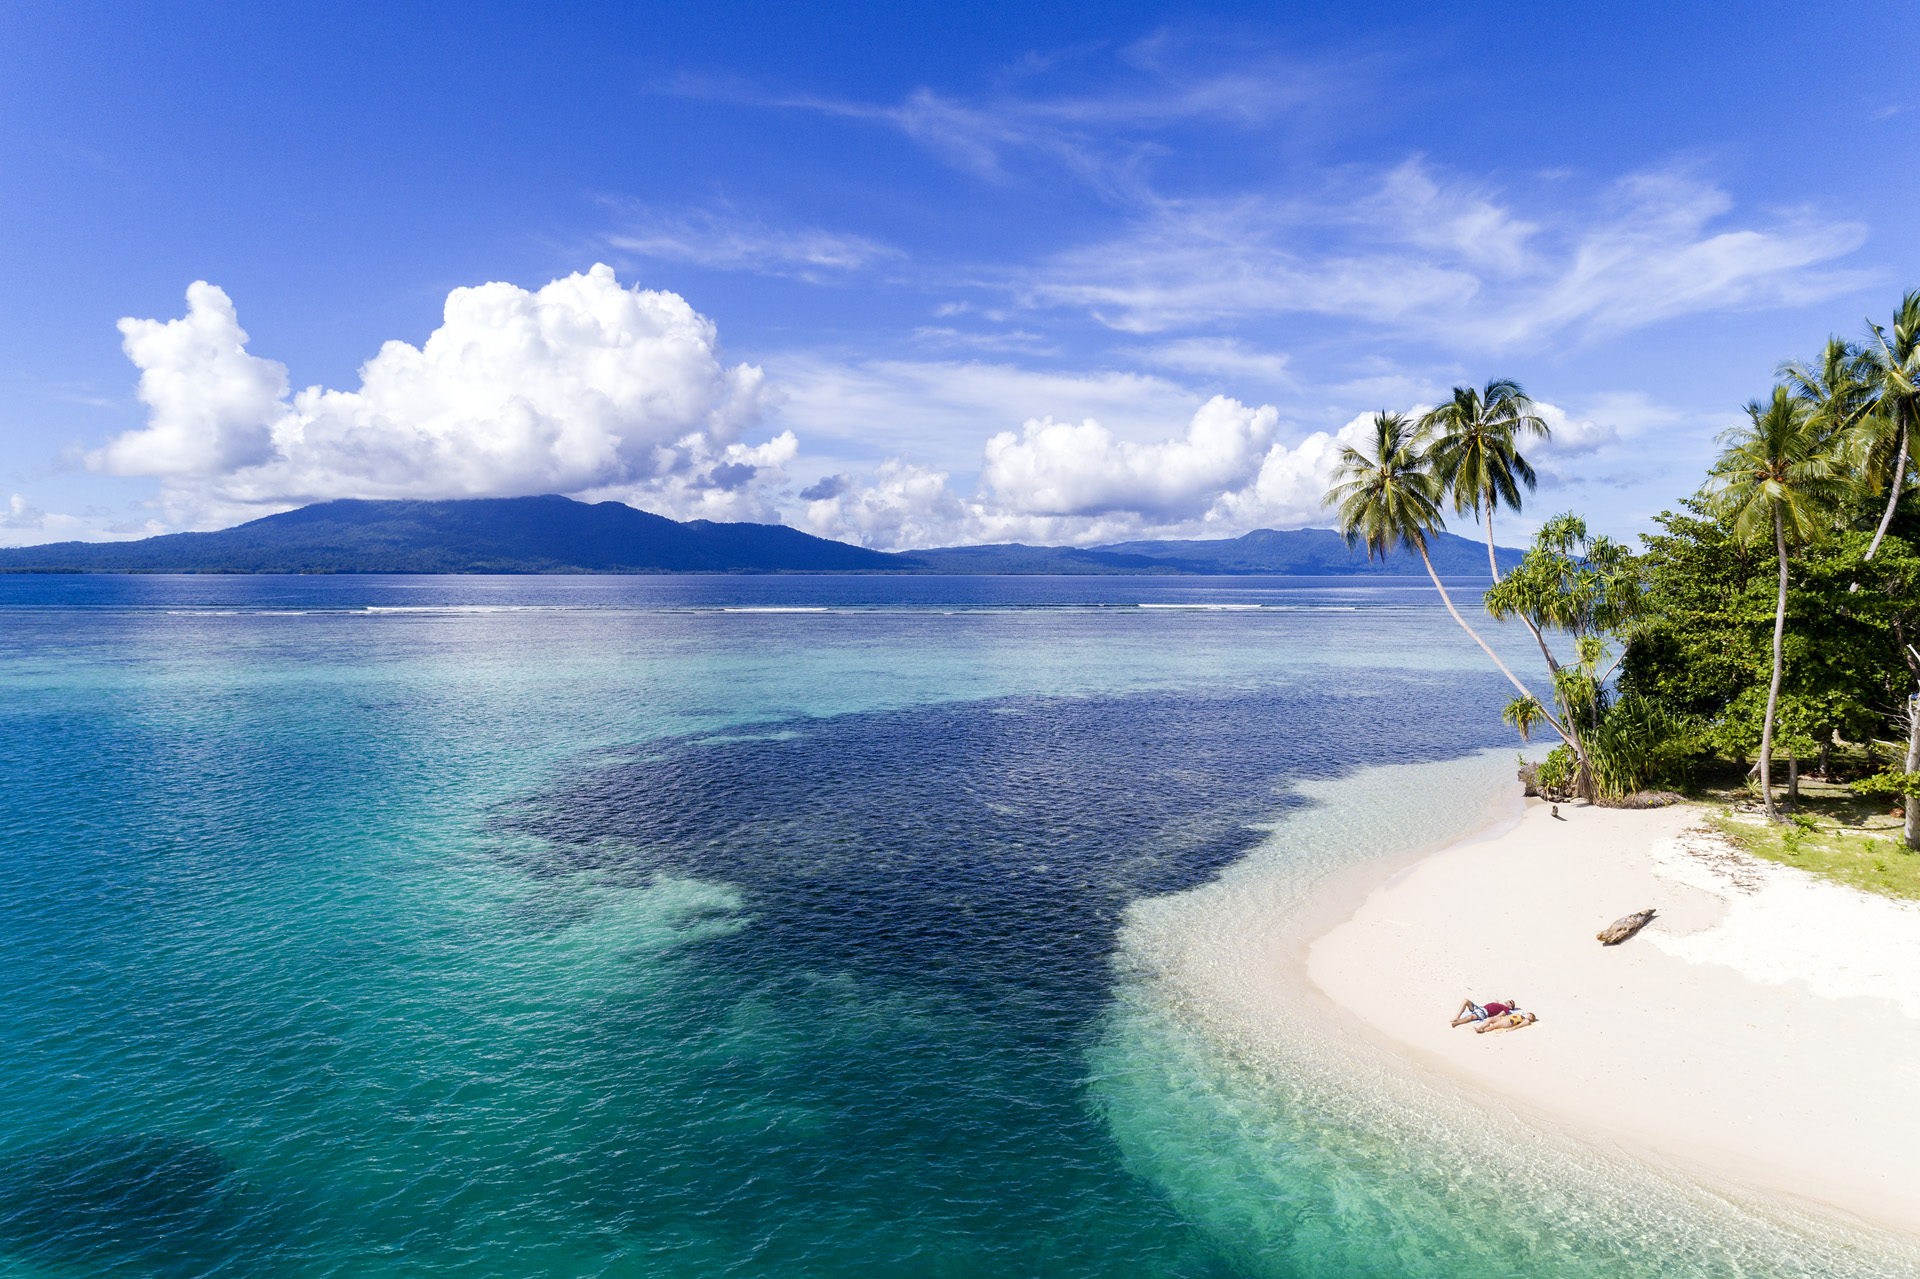 Solomon Islands tourism sector is ready for reopening